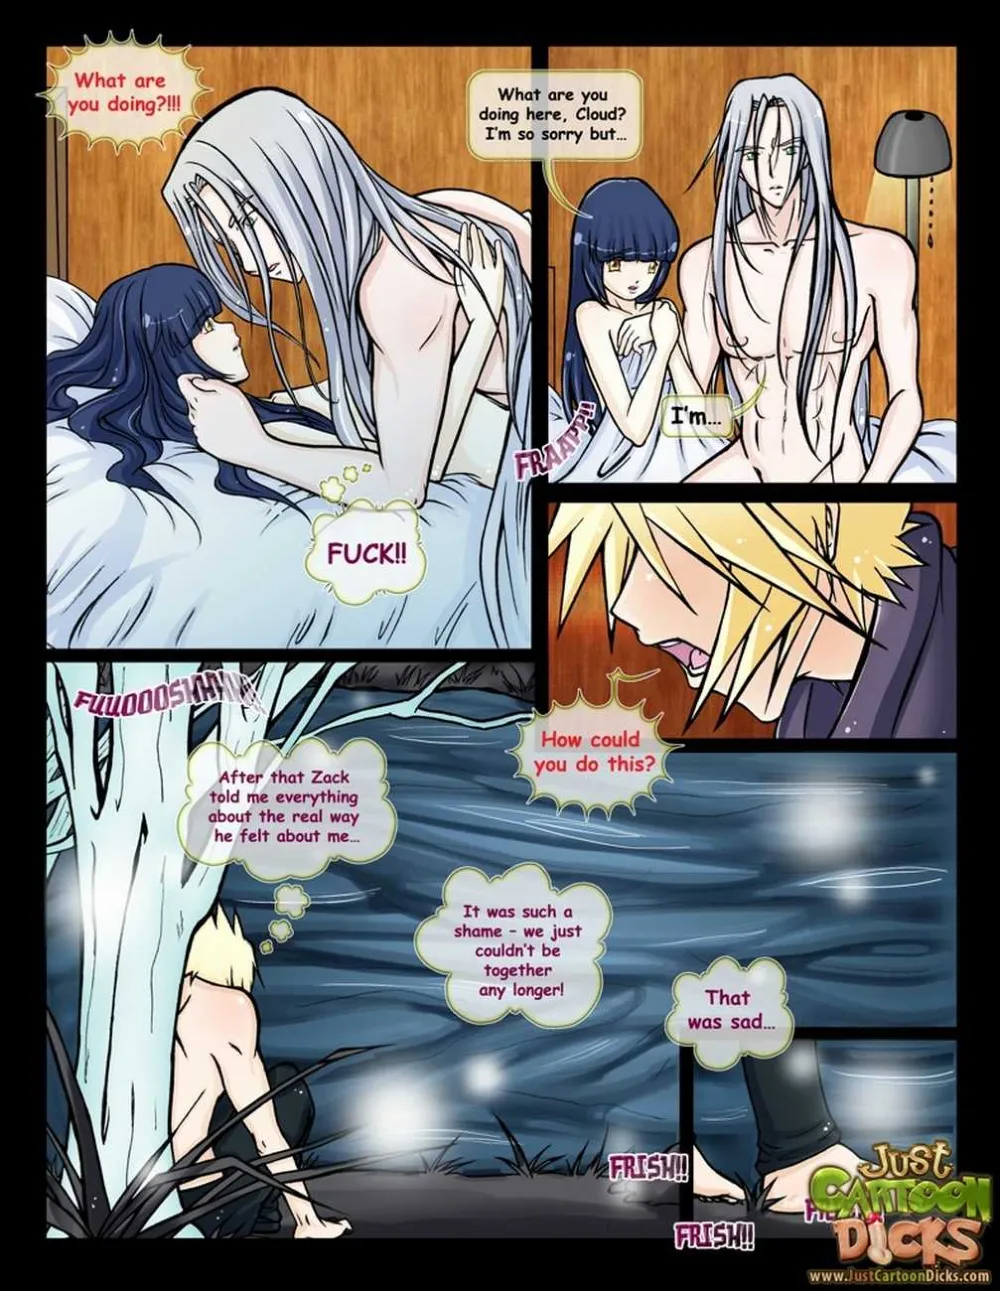 Traces Of The Past- Final Fantasy - Page 6